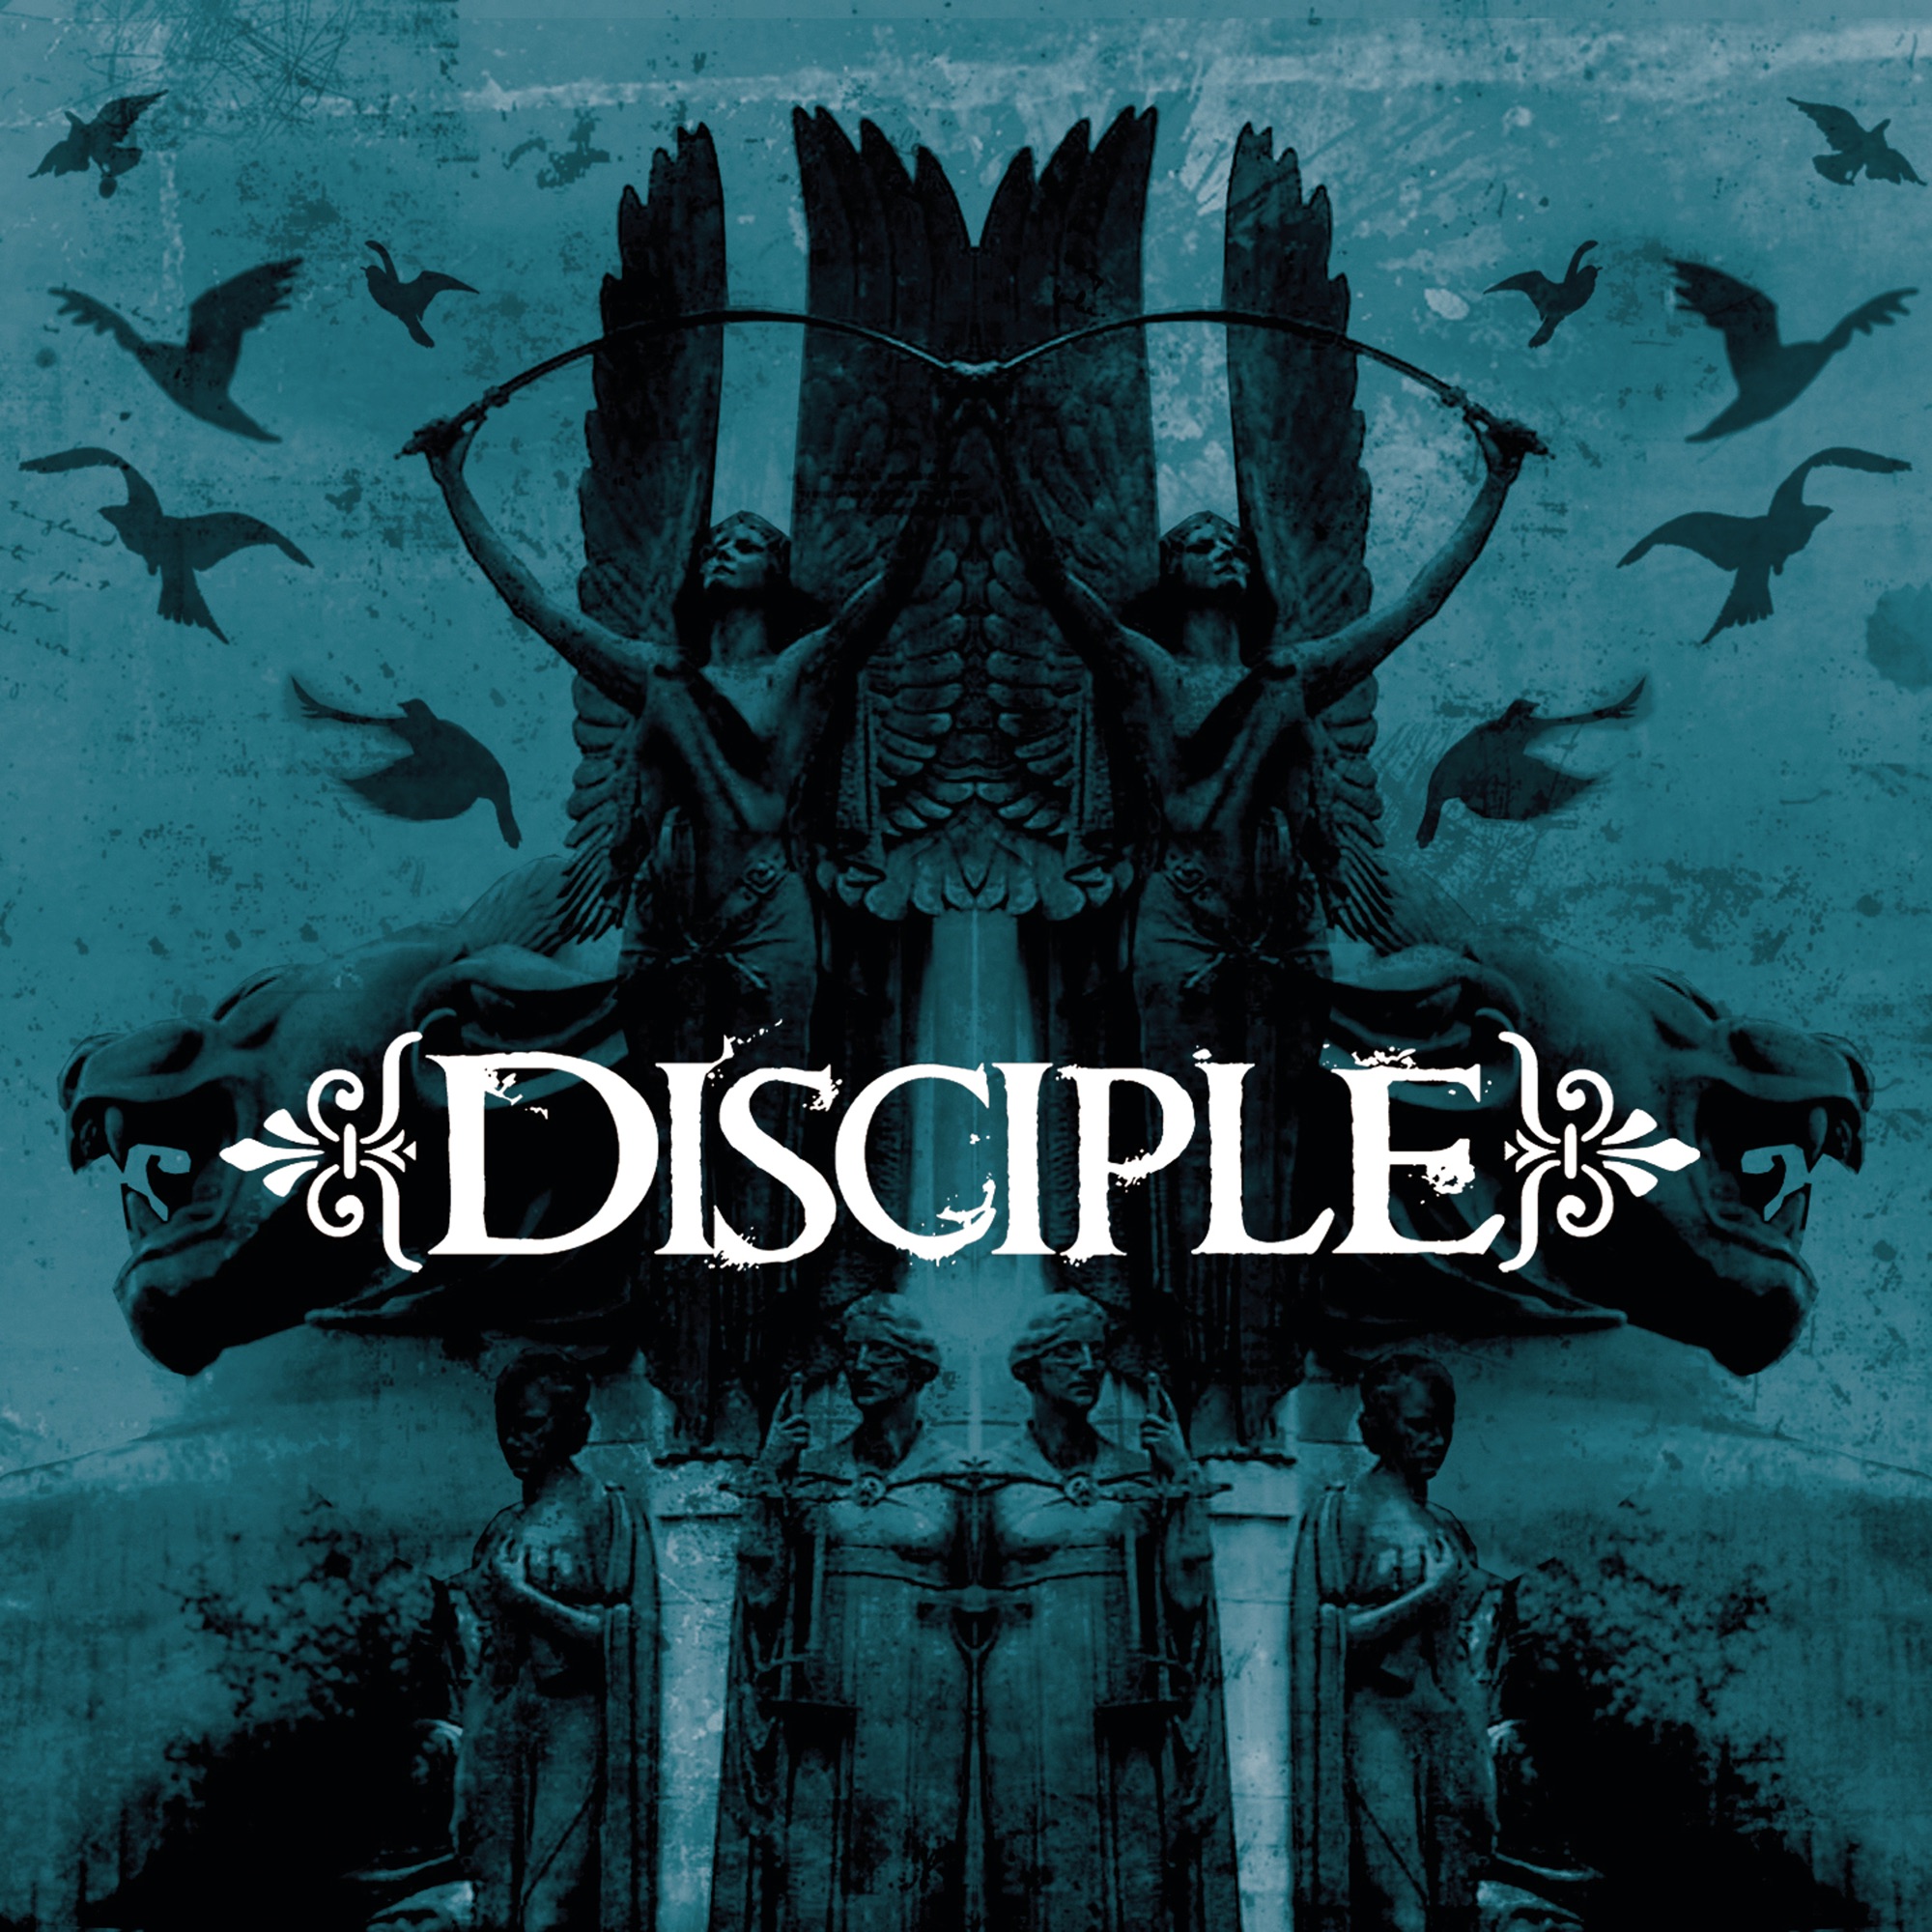 Art for Things Left Unsaid by Disciple